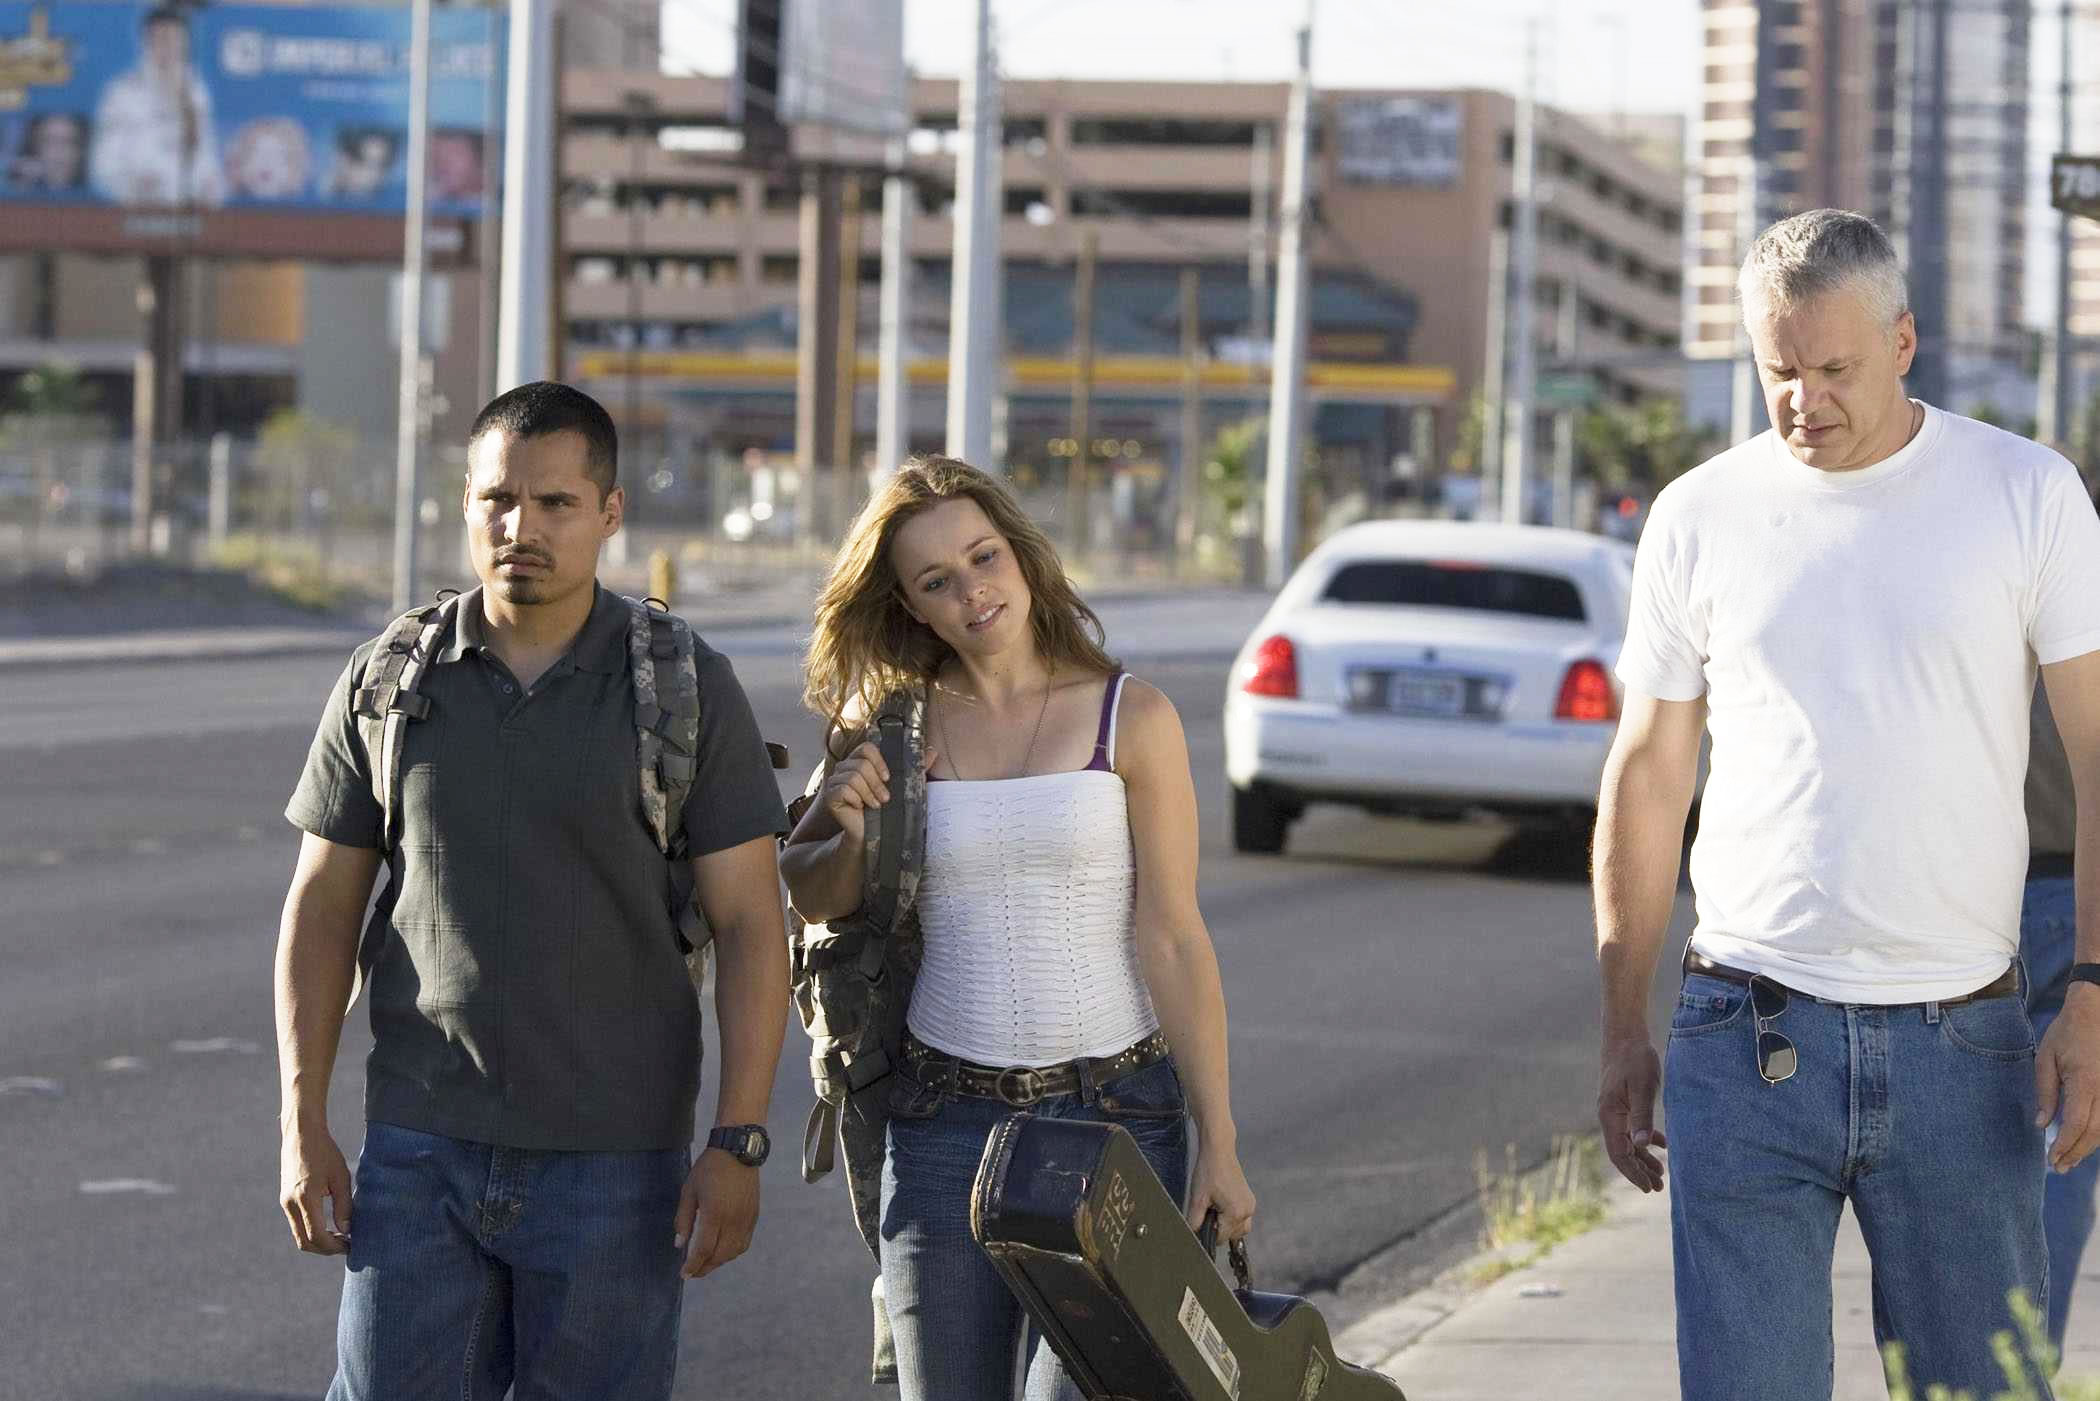 Michael Pena (as TK, left), Rachel McAdams (as Colee) and Tim Robbins (as Cheaver) in THE LUCKY ONES (2008). Photo credit: Matt Dinerstein.